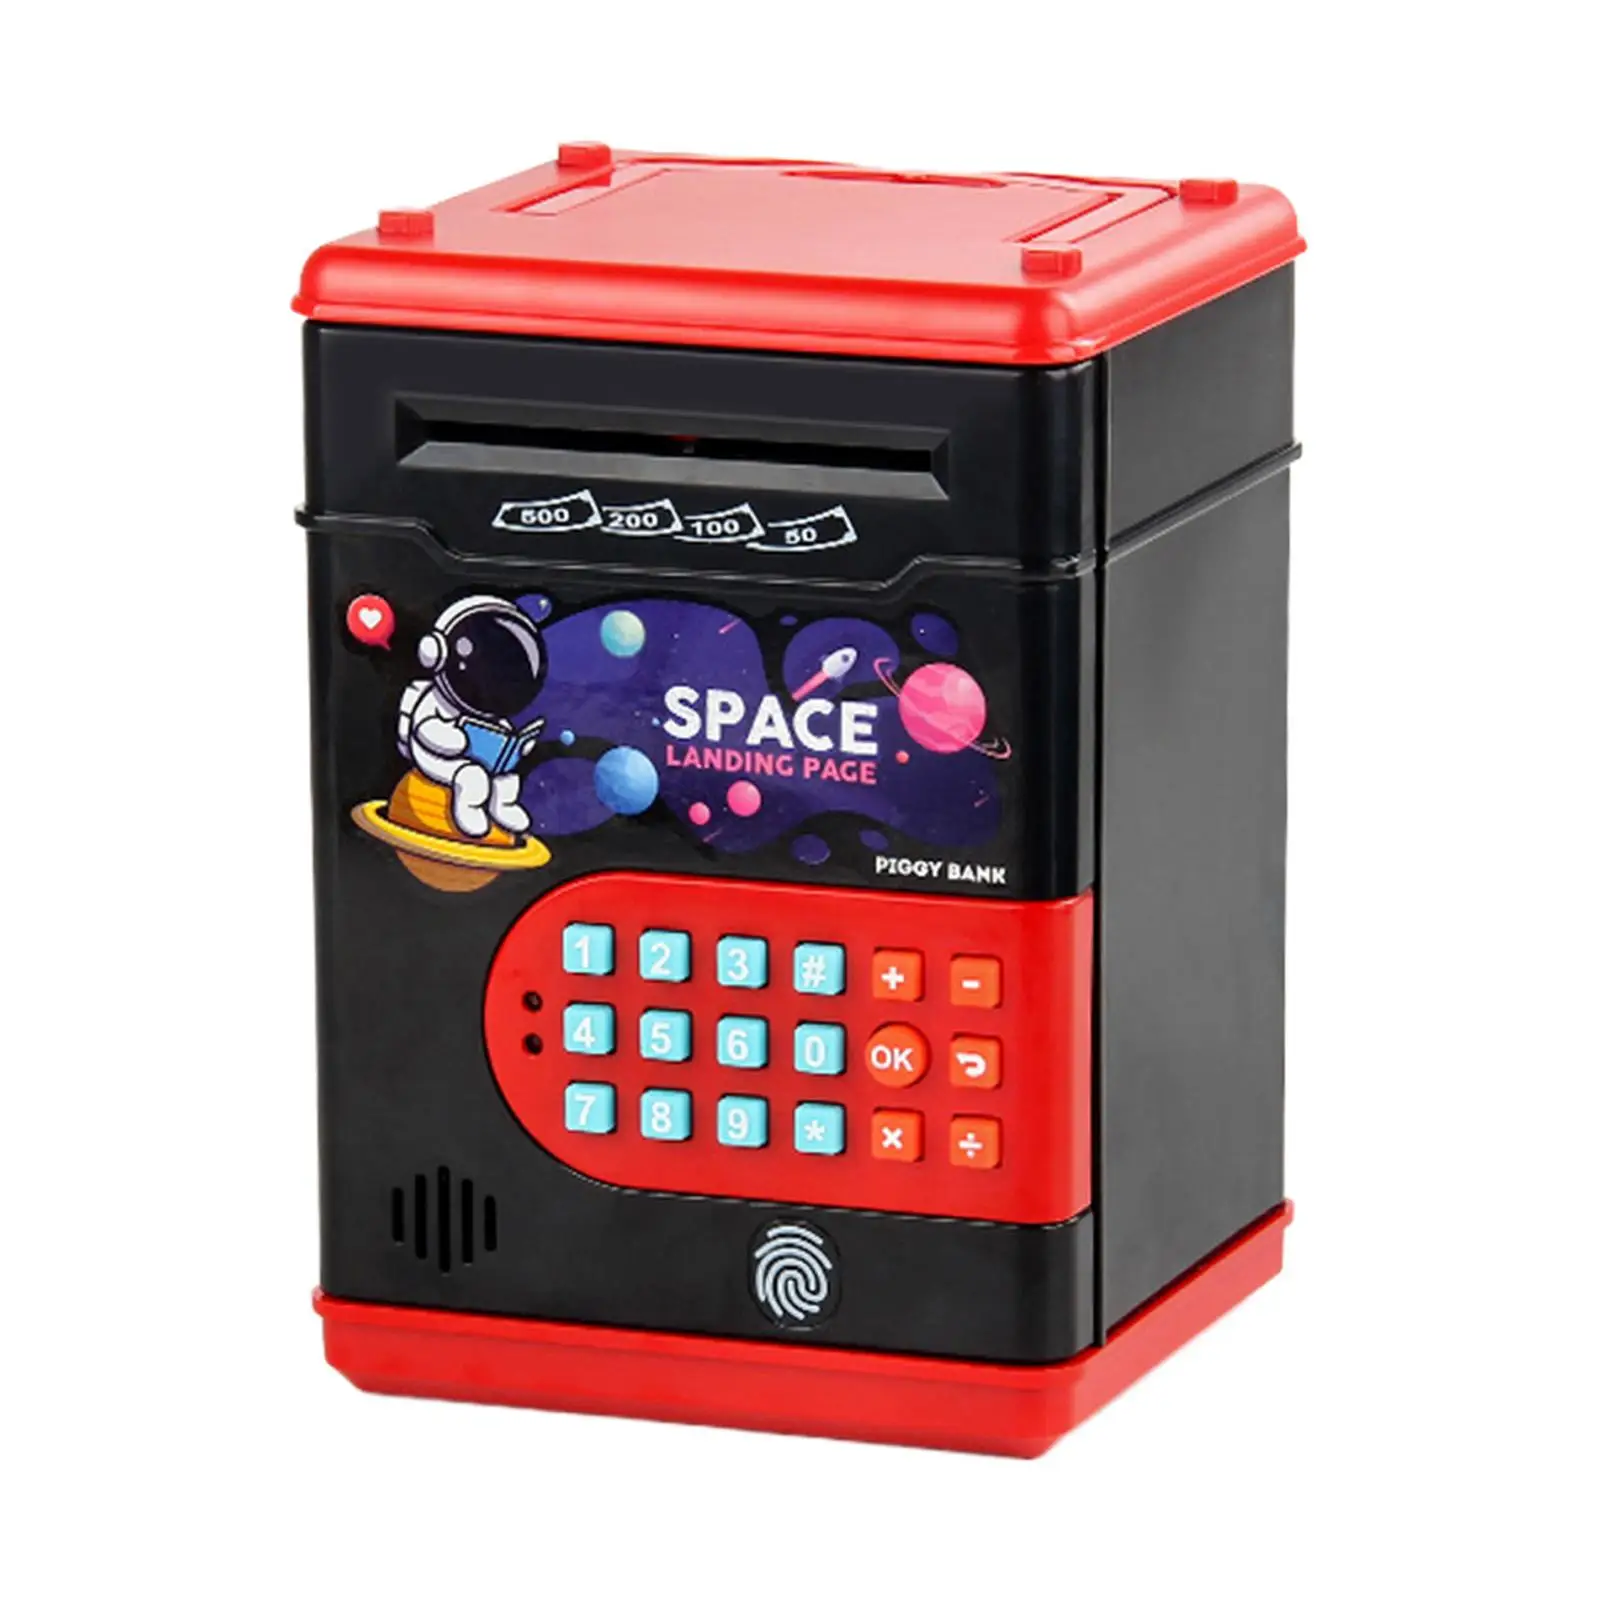 Large Capacity Password ATM Machine Toy Password Code Lock Atm Piggy Bank Atm Box for Boys Children Birthday Gifts